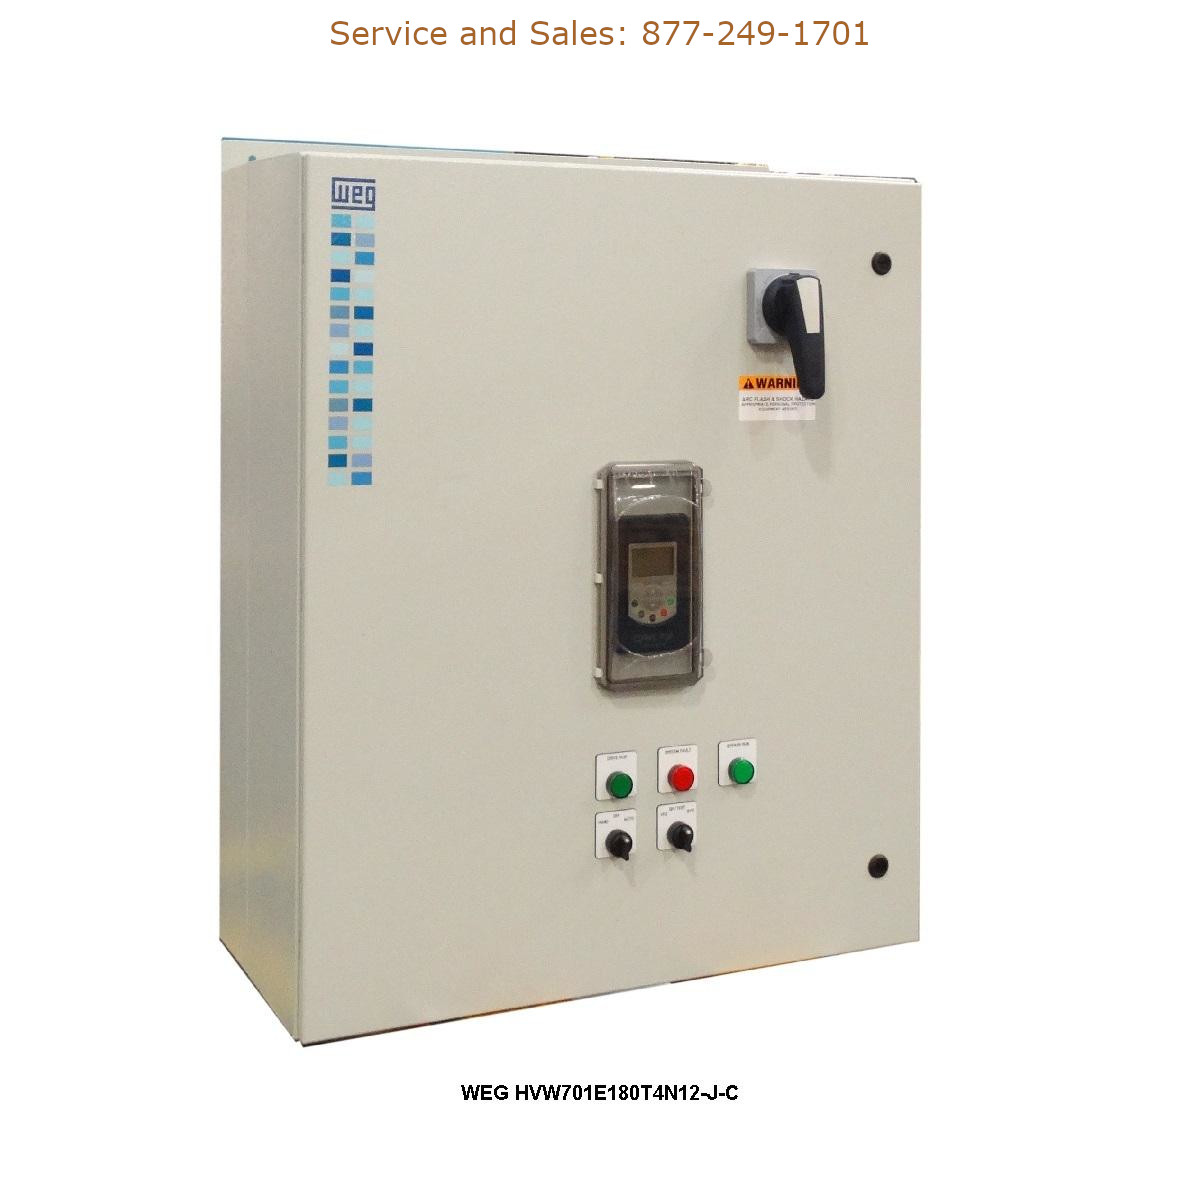 WEG HVW701E180T4N12-J-C WEG Model Number HVW701E180T4N12-J-C WEG Drives, Variable Speed Drives Repair Service, Troubleshooting, Replacement Parts https://gesrepair.com/wp-content/uploads/2022/WEG/WEG_HVW701E180T4N12-J-C_Drives_Variable_Speed_Drives.jpg